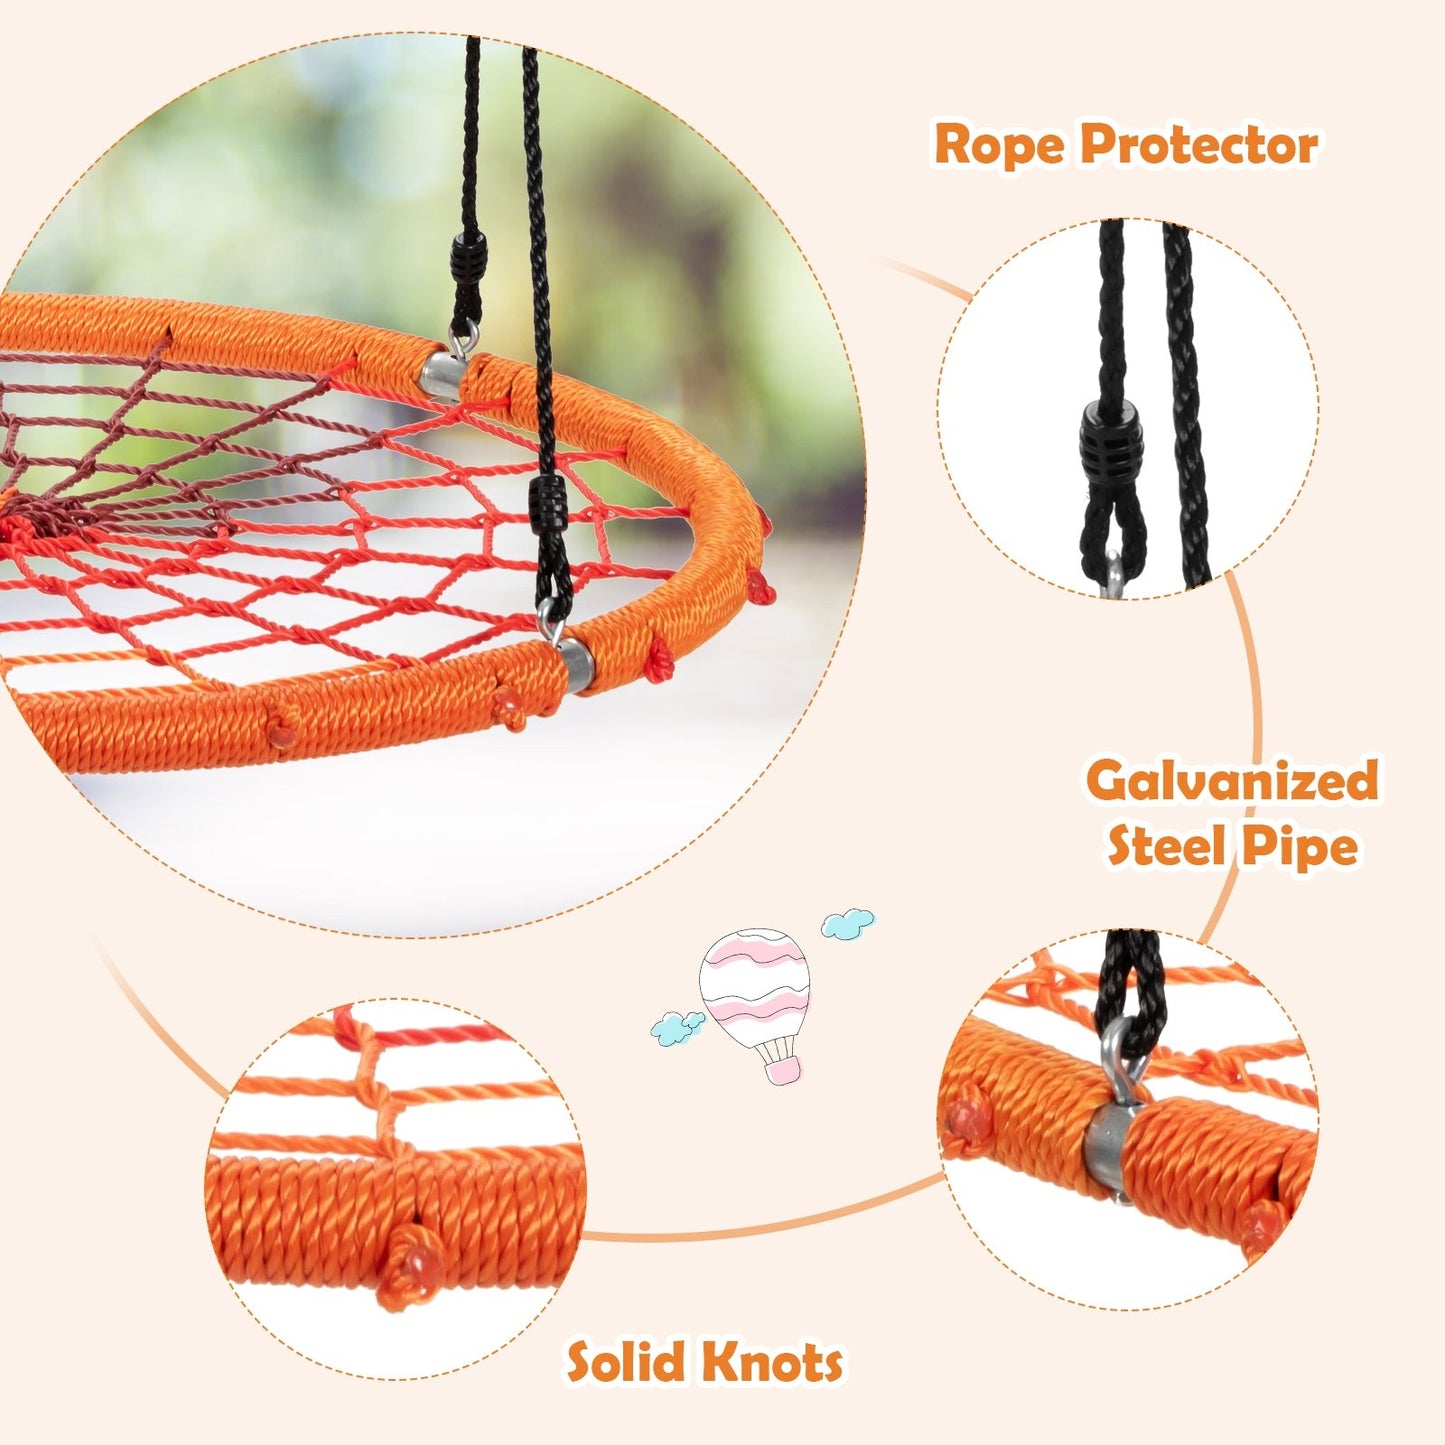 40 Inch Spider Web Tree Swing Kids Outdoor Play Set with Adjustable Ropes, Orange - Gallery Canada